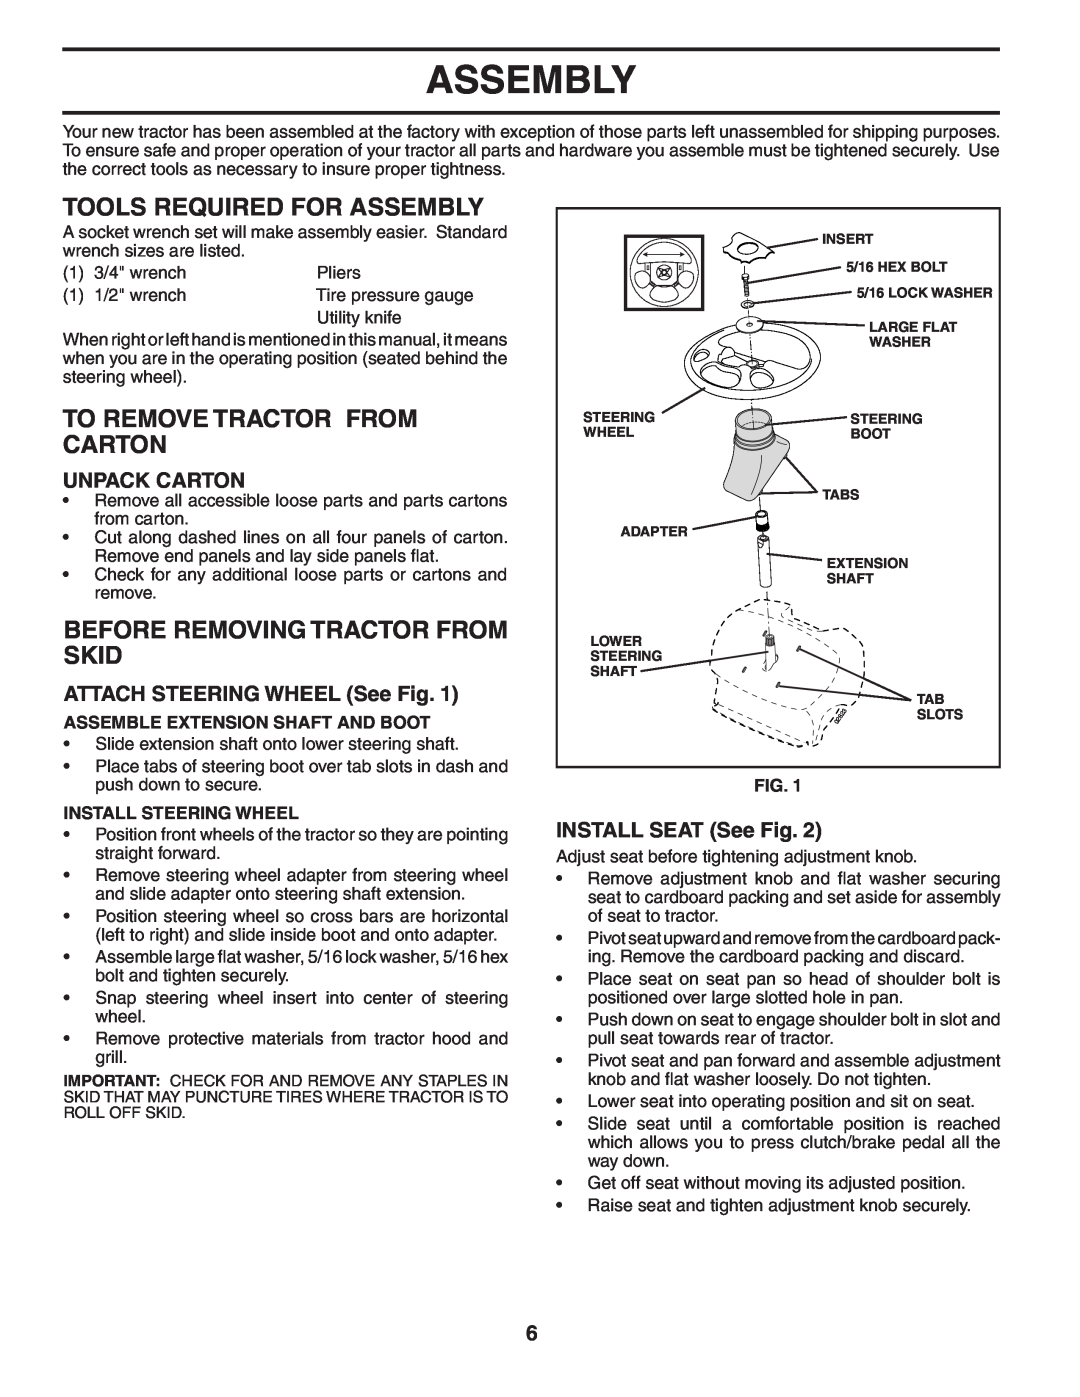 Poulan 405385 manual Tools Required For Assembly, To Remove Tractor From Carton, Before Removing Tractor From Skid 